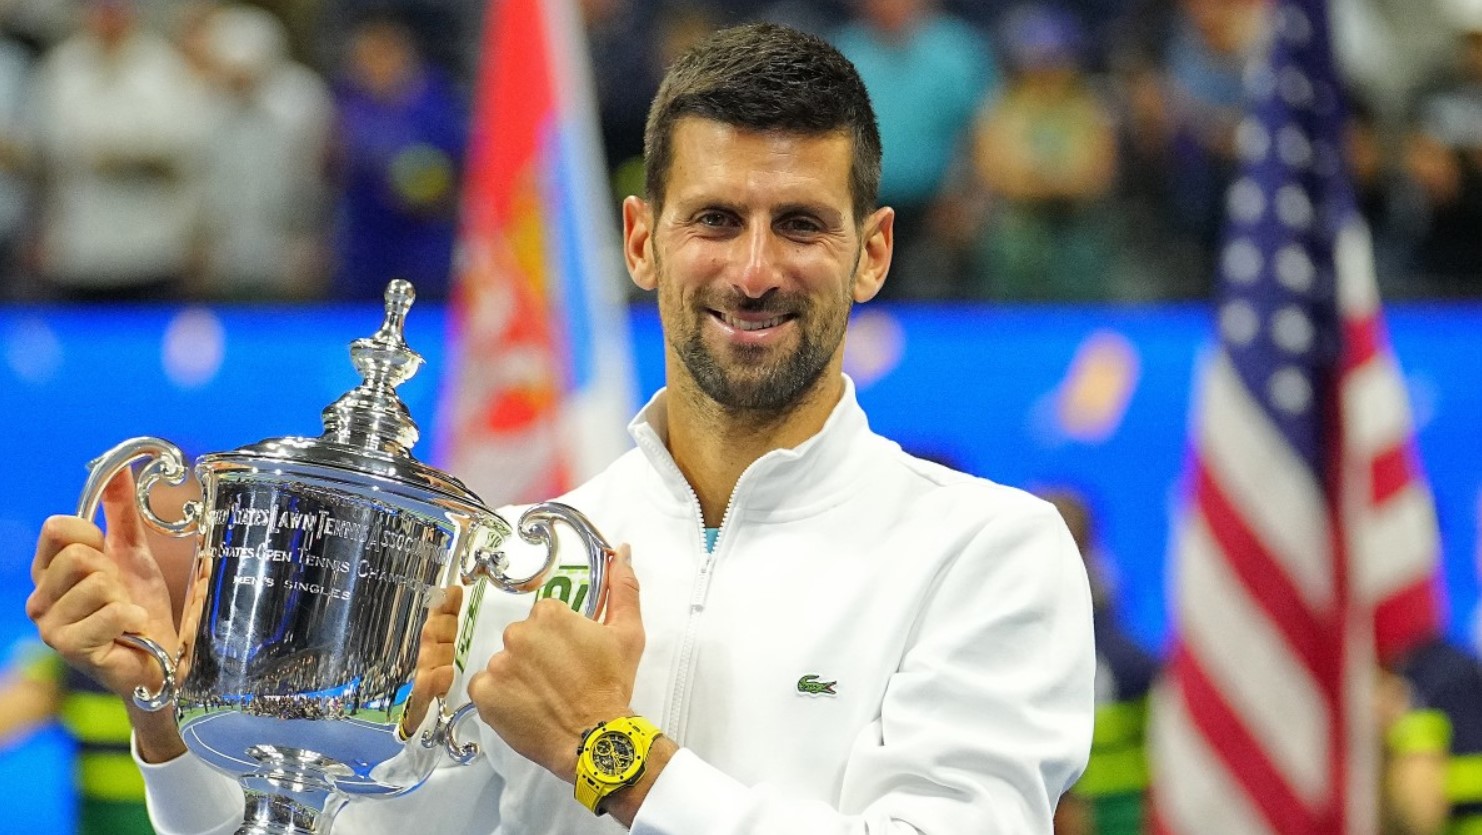 Novak Djokovic win his fourth US Open and his 24th Grand Slam singles title - GK Now